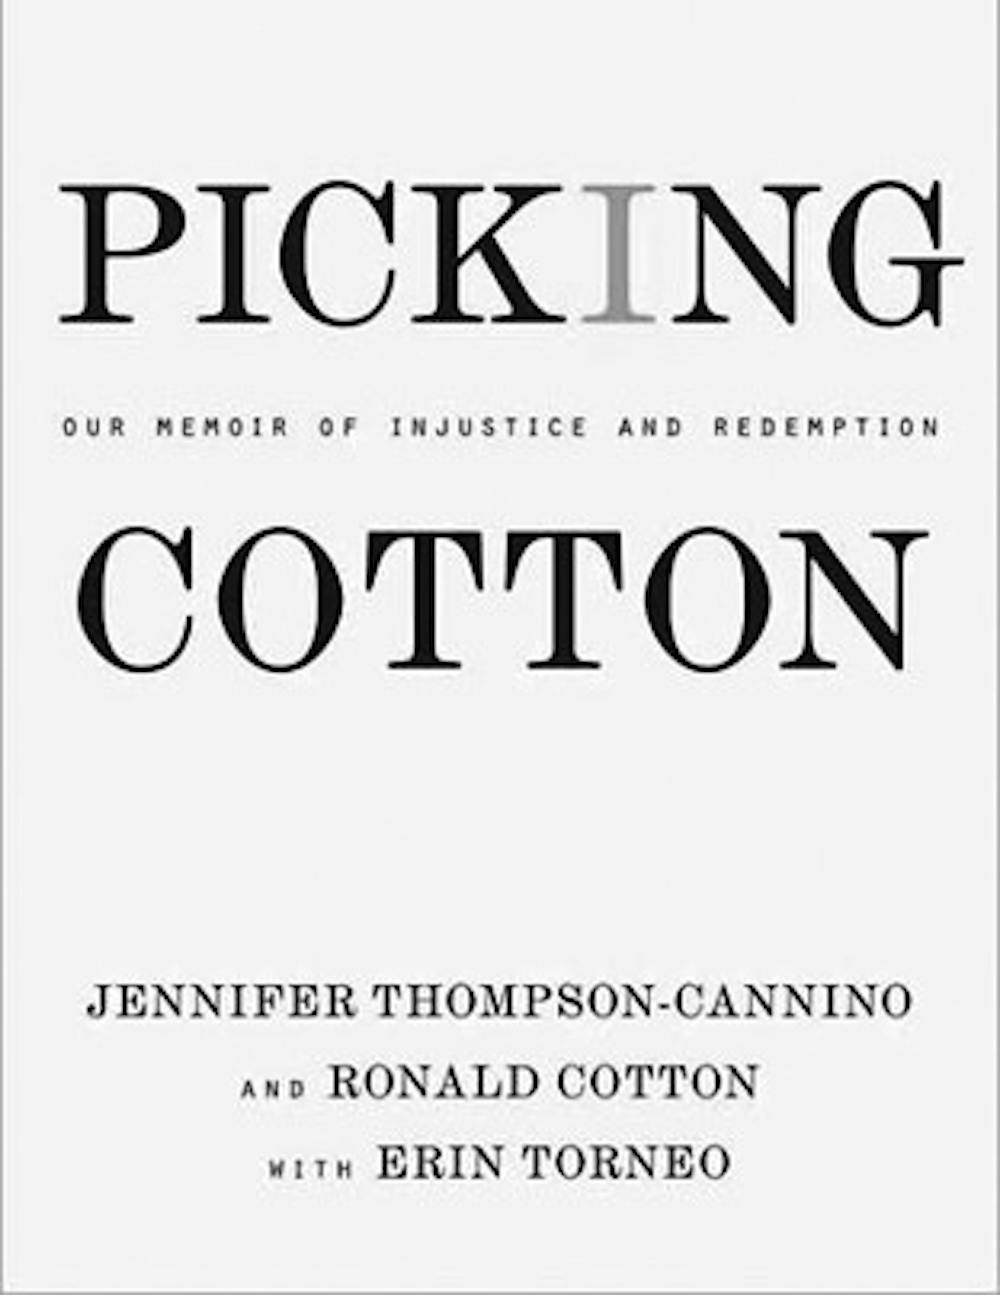 Picking Cotton, a memoir by Jennifer Thompson-Cannino and Ronald Cotton, is the 2010  summer reading book.